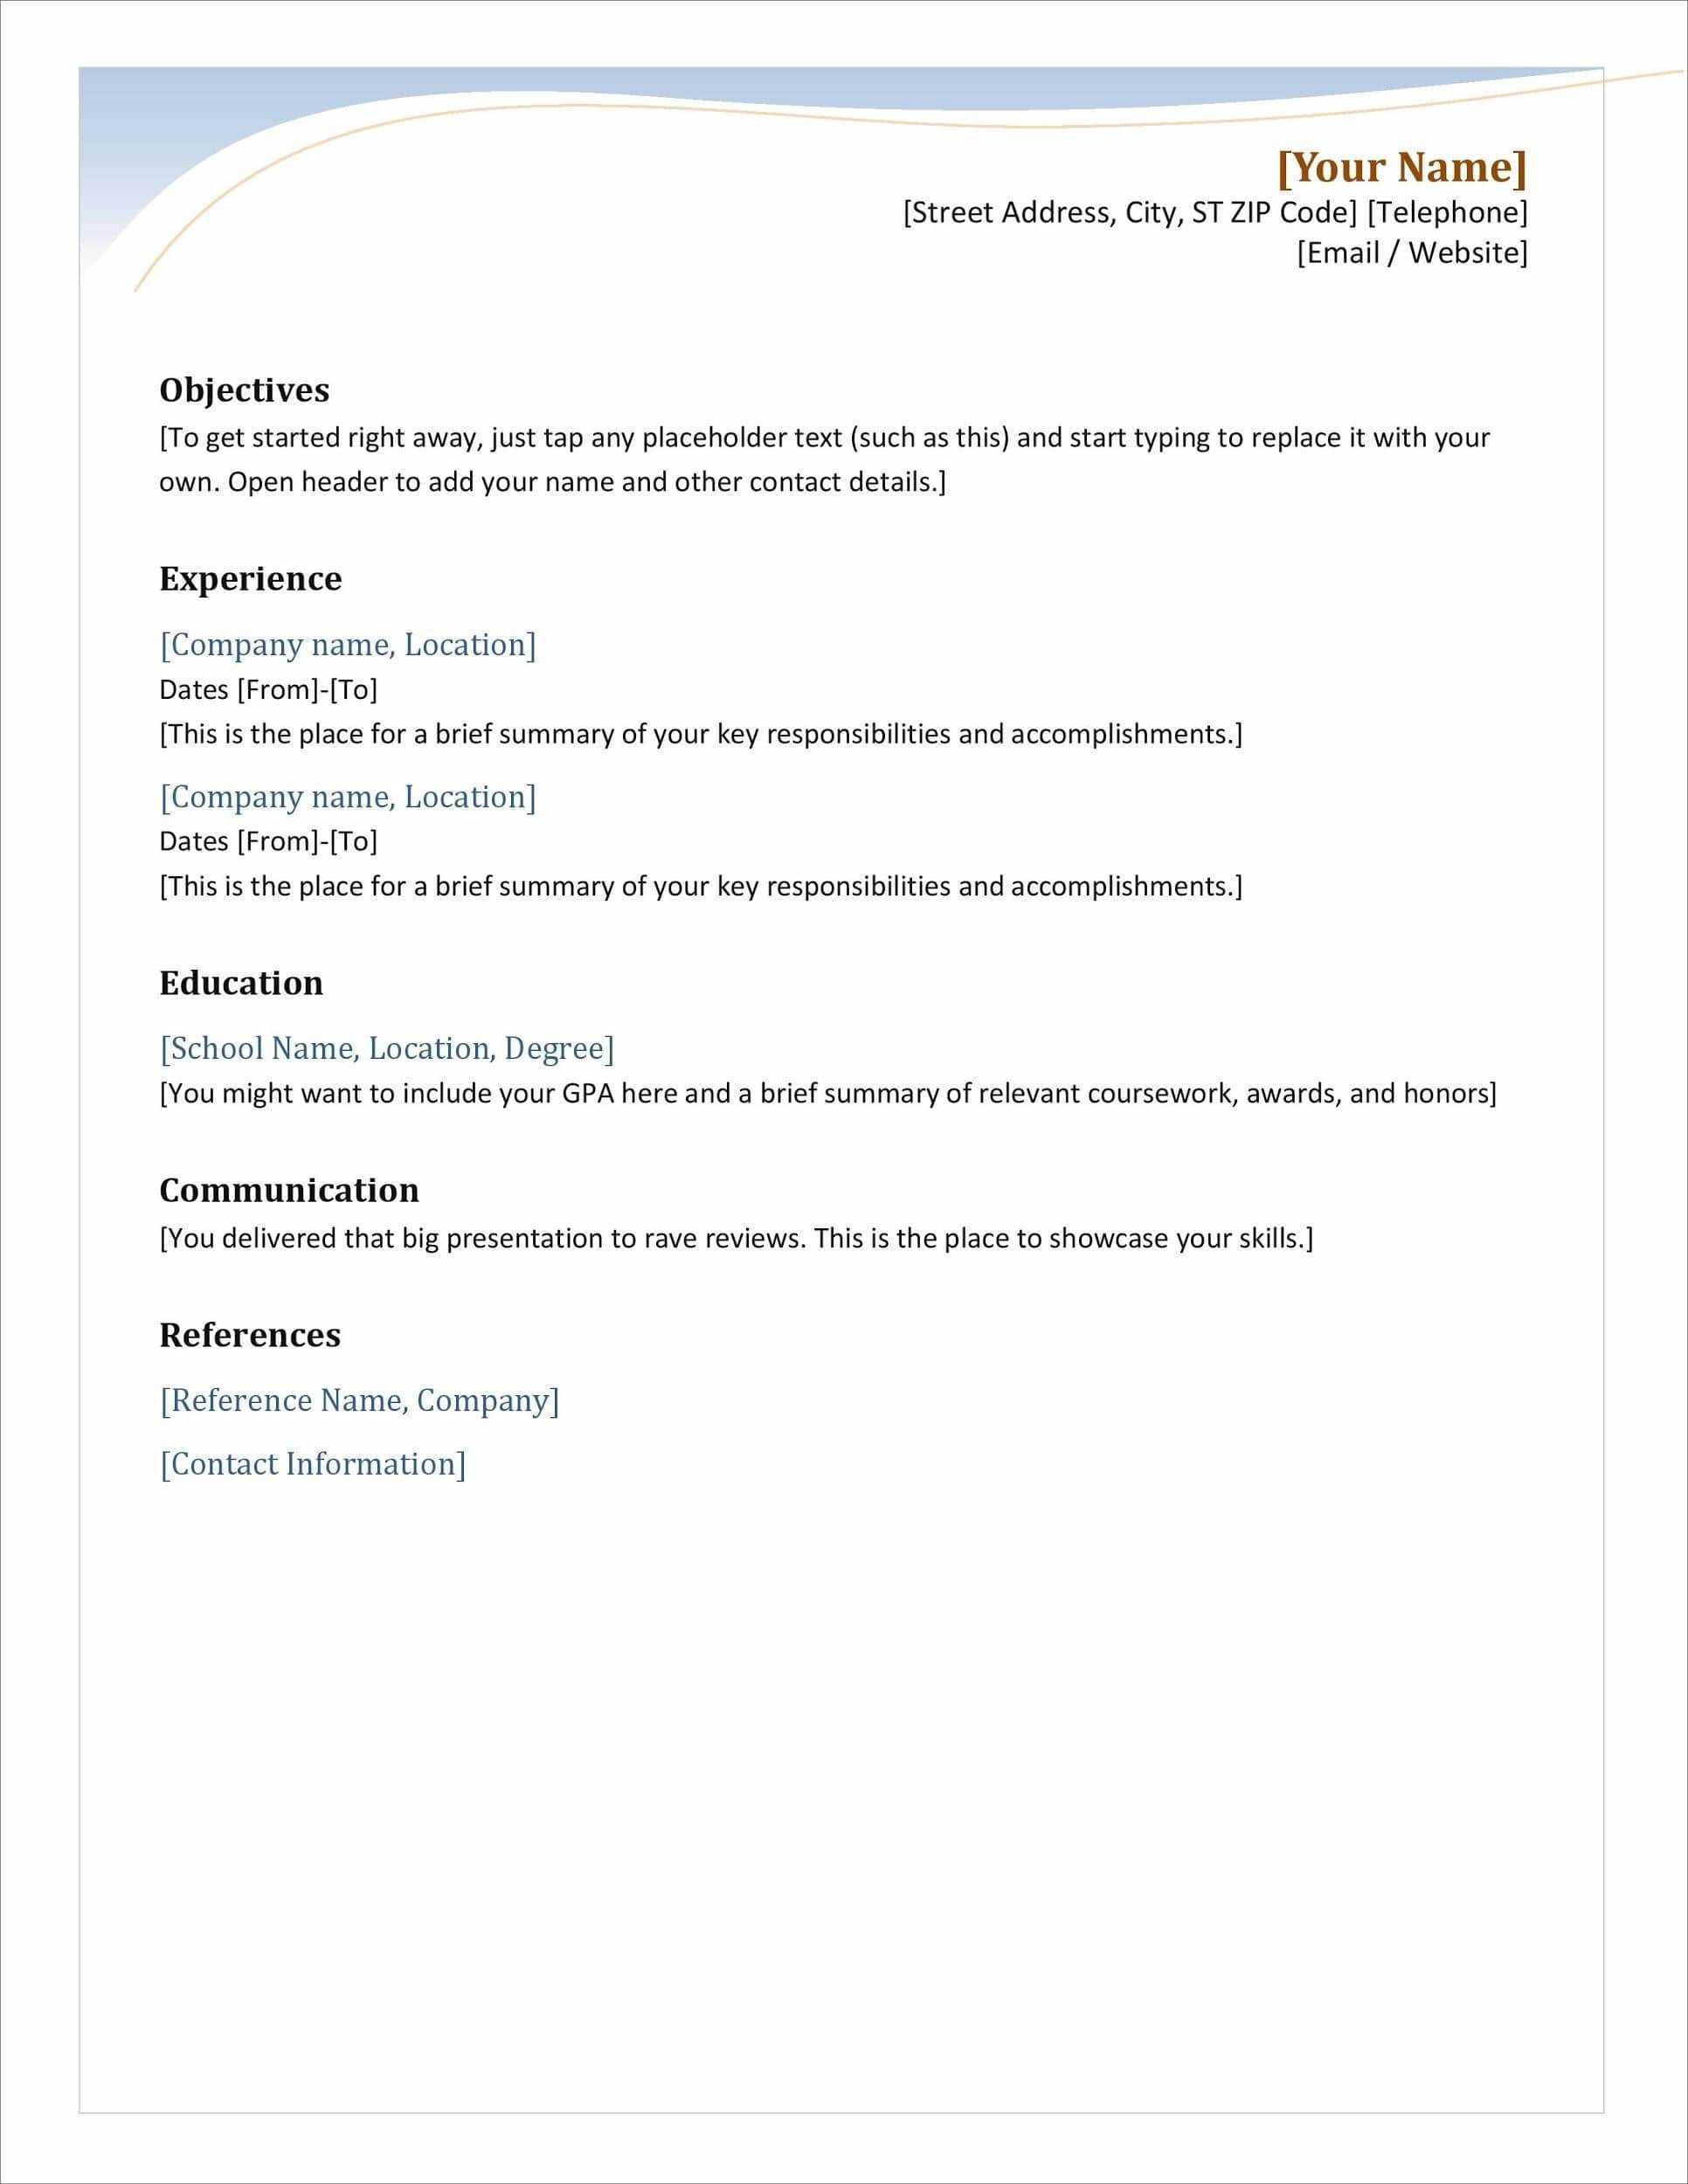 25 Resume Templates For Microsoft Word [Free Download] Intended For Simple Resume Template Microsoft Word